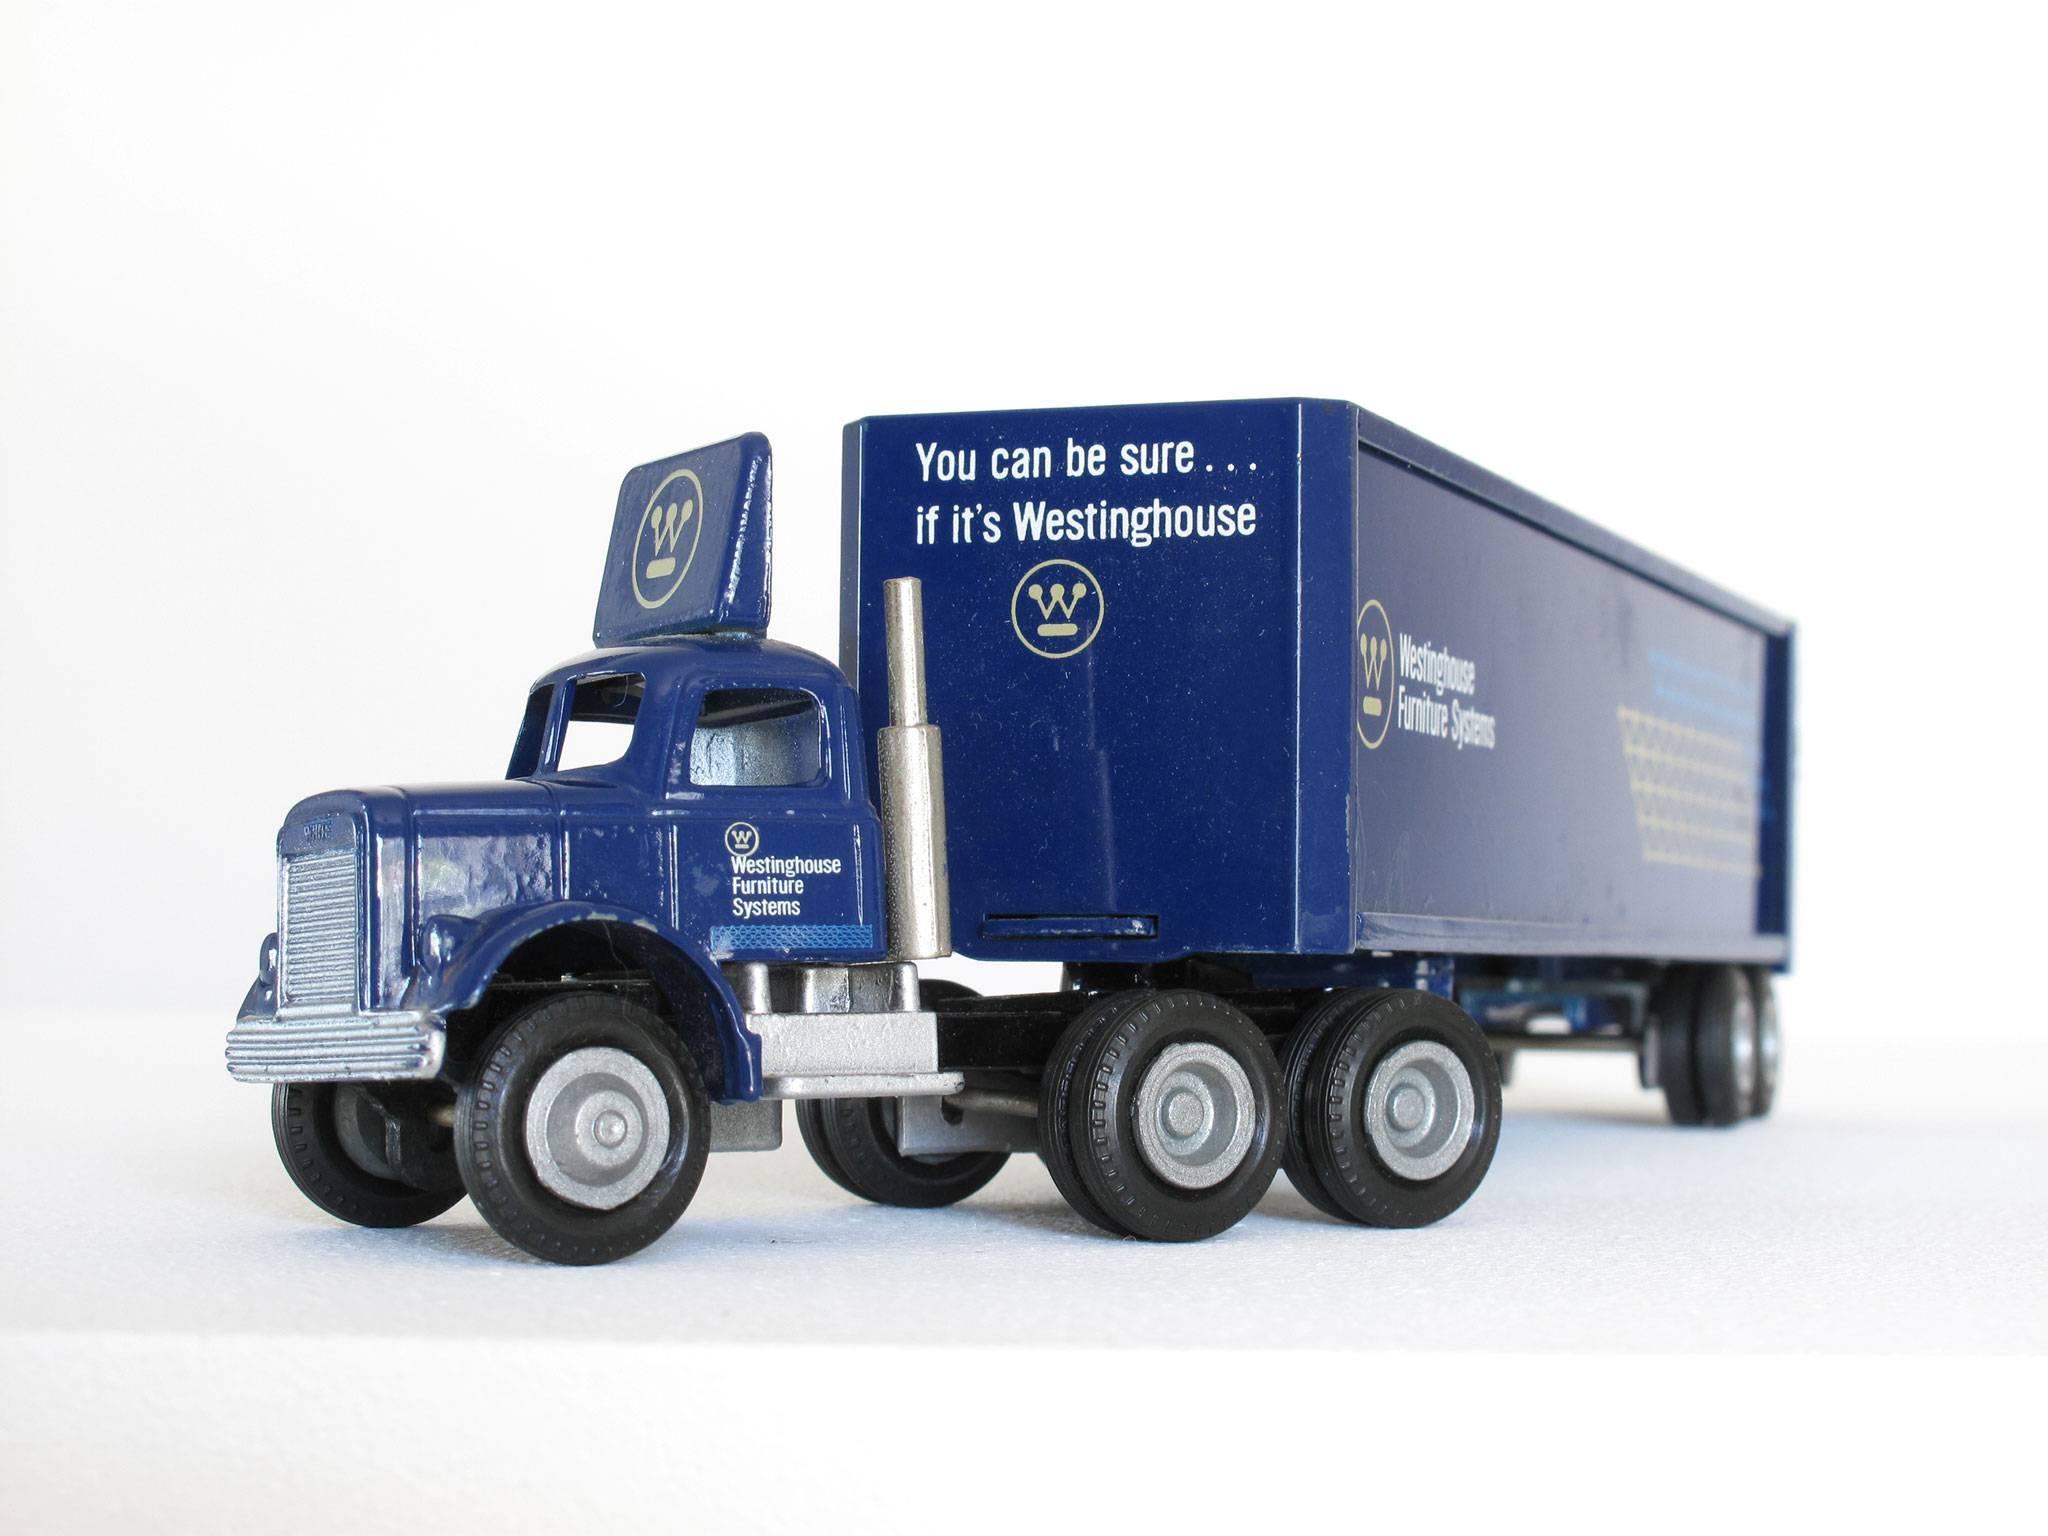 Fun, collectible Westinghouse furniture miniature truck advertising, 1:64 scale model, semi-truck with cab and trailer, made of die cast metal, paint and plastic.
Dimensions: 2 3/8 high x 9 1/4 wide x 1 1/2 deep inches.
Condition: Good